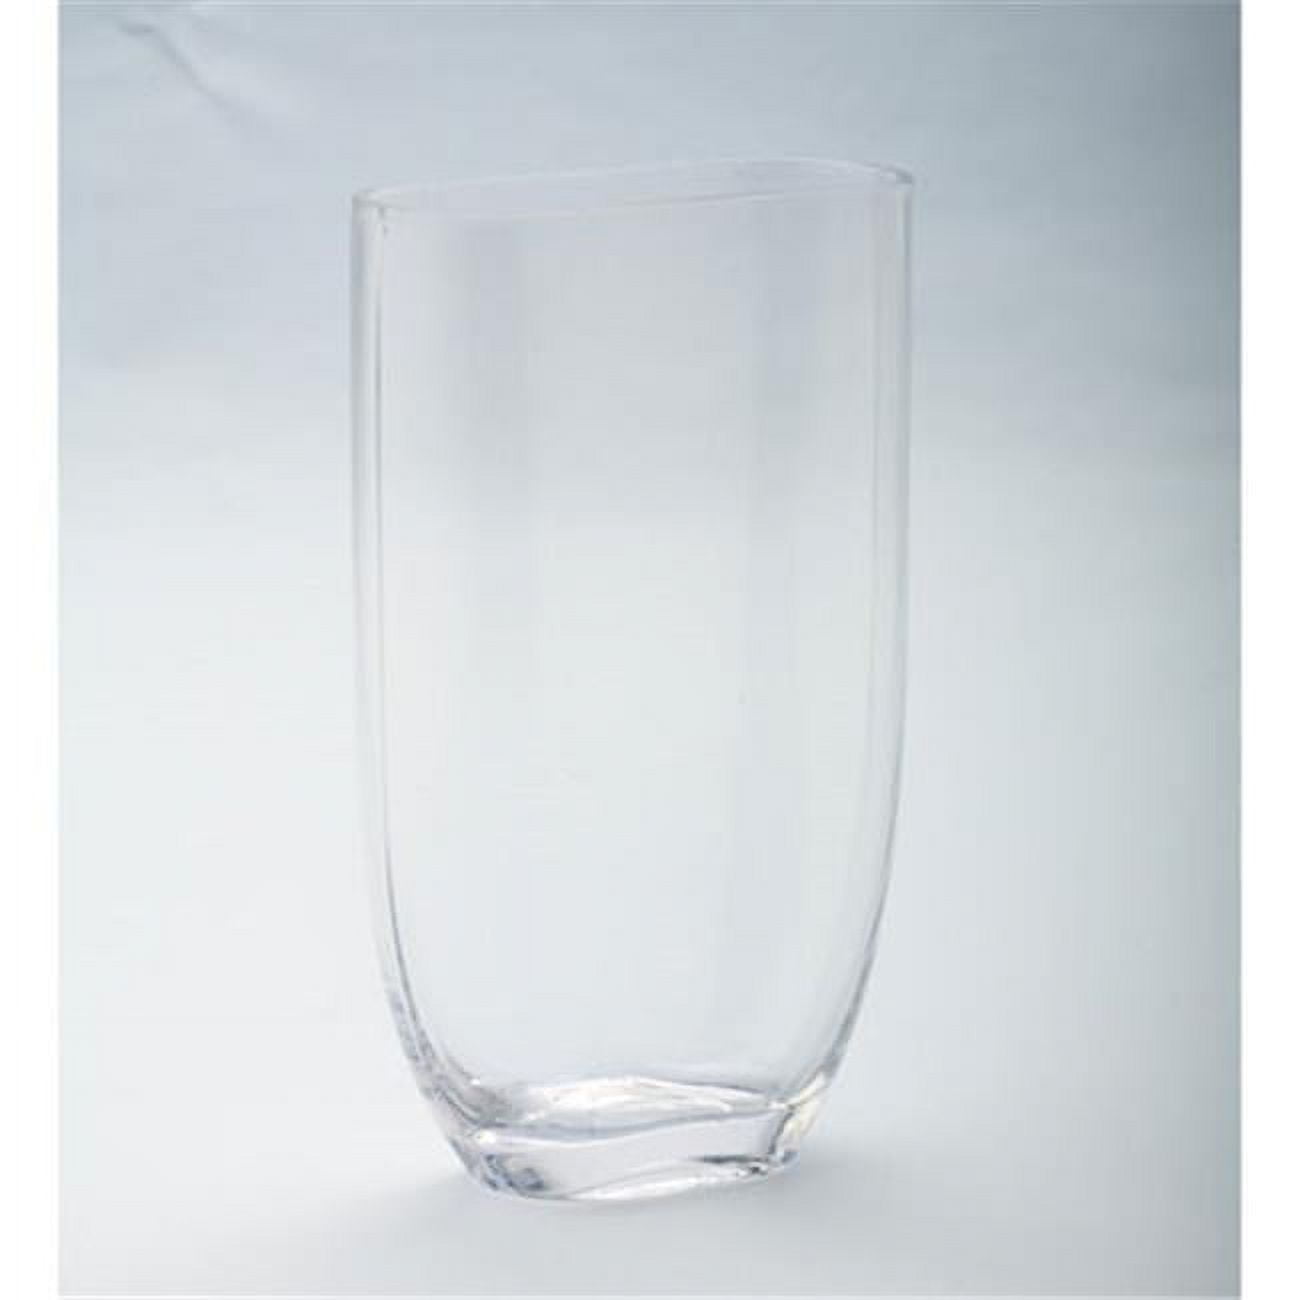 8.5 X 2.5 X 5 In. Tapered Oval Glass Vase, Clear